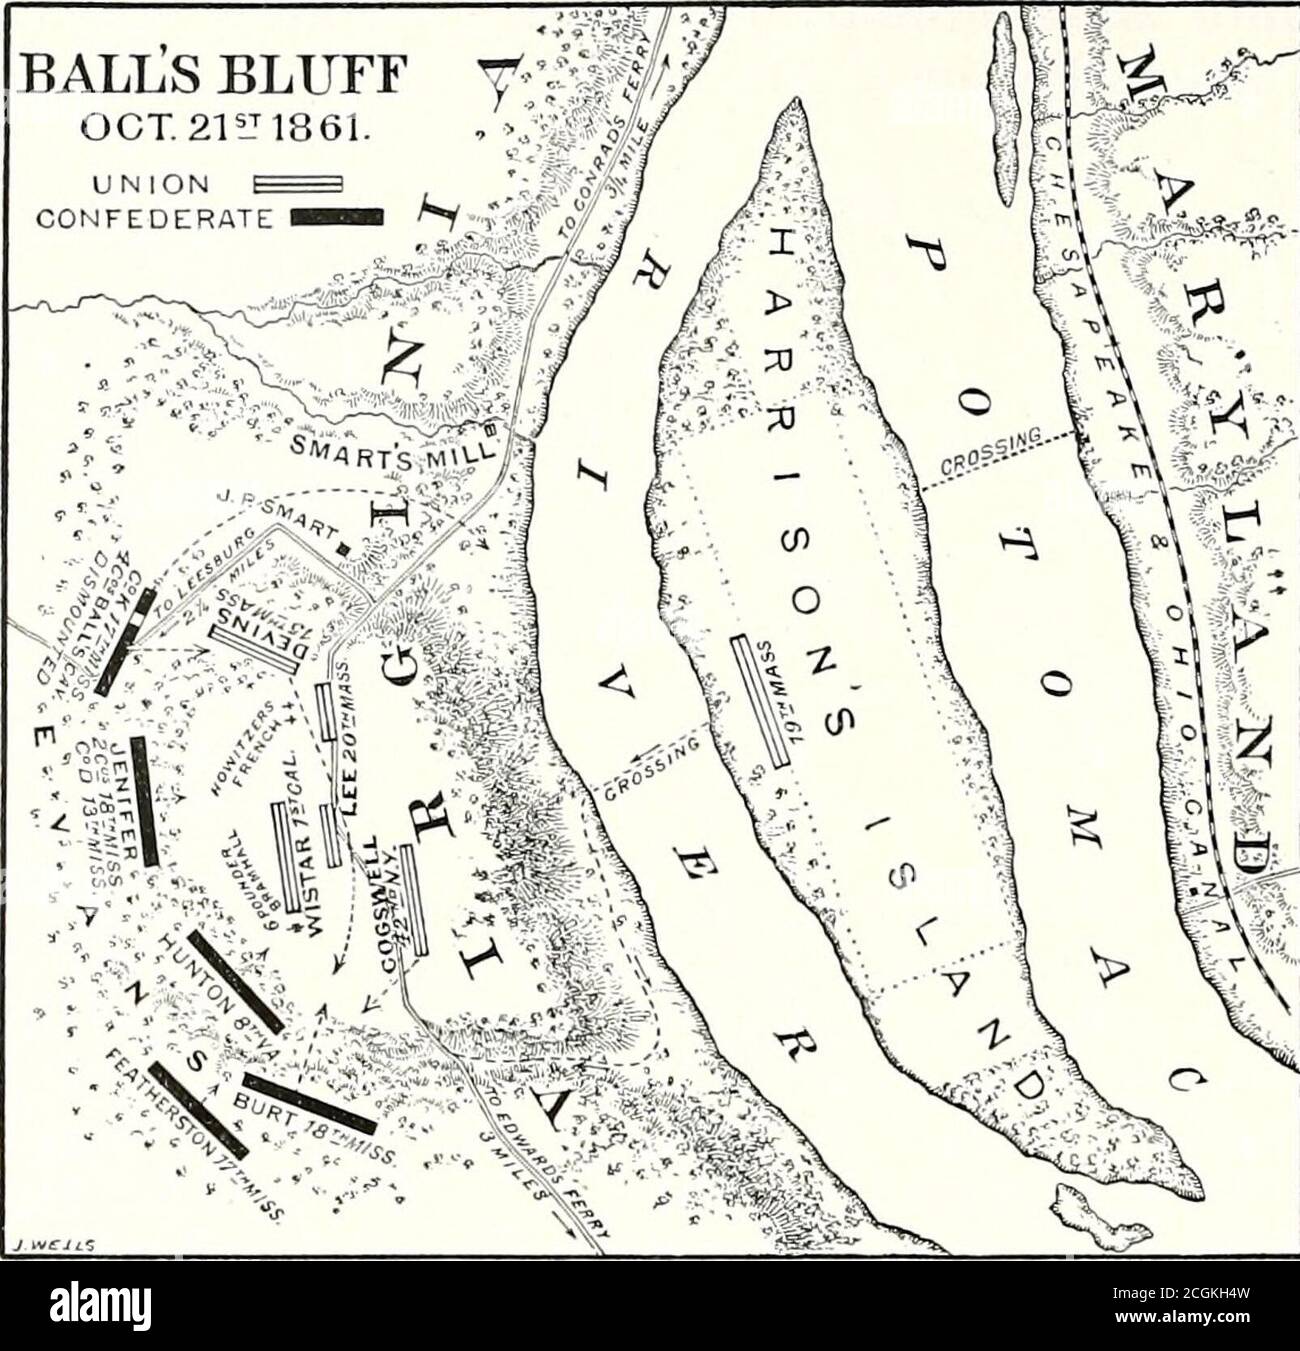 . Battles and leaders of the Civil War : being for the most part contributions by Union and Confederate officers . f remaining with Grorman at Edwards Ferry to direct the crossing there, General Stone placed Colonel E. D. Baker, of the 71st Pennsylvania Regiment (also called the 1st California, in compliment to Colonel Baker), in command of the movement by Harrisons Island and Balls Bluff, under the following orders: Headquarters Corps of Observation, Edwards Ferry, October 21st —11: 50.— ColonelE. D. Baker, Commanding Brigade. Colonel : I am informed that the force of the enemyis about 4000, Stock Photo